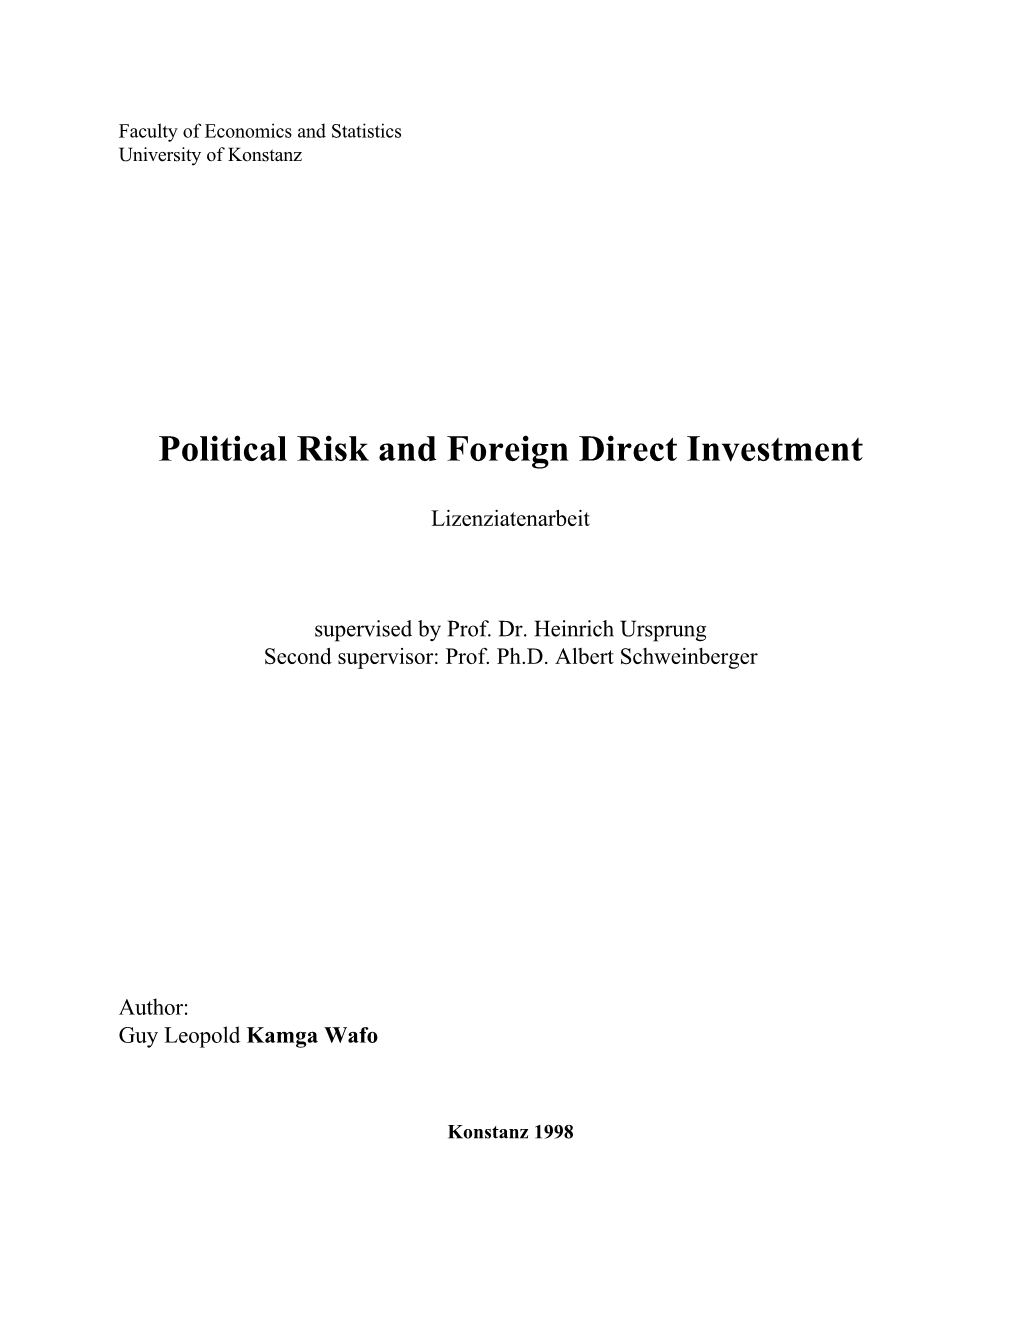 Political Risk and Foreign Direct Investment